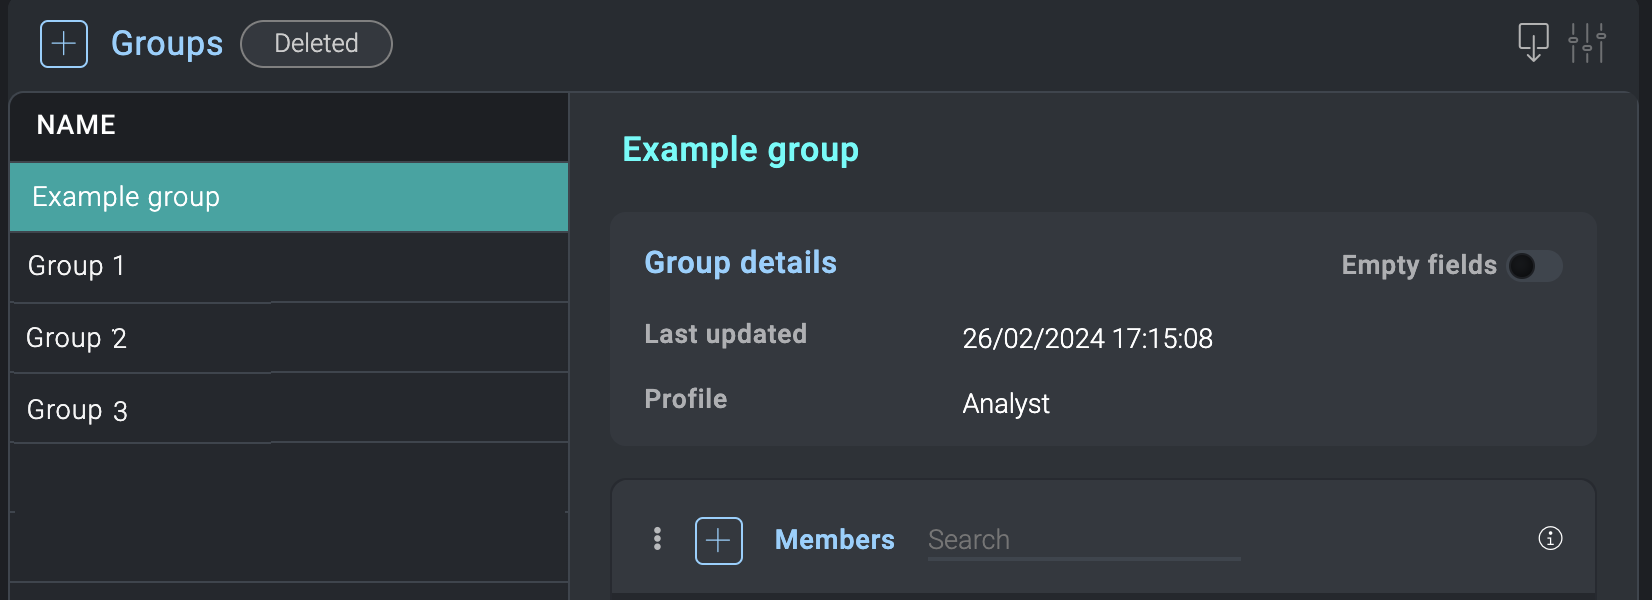 Example group